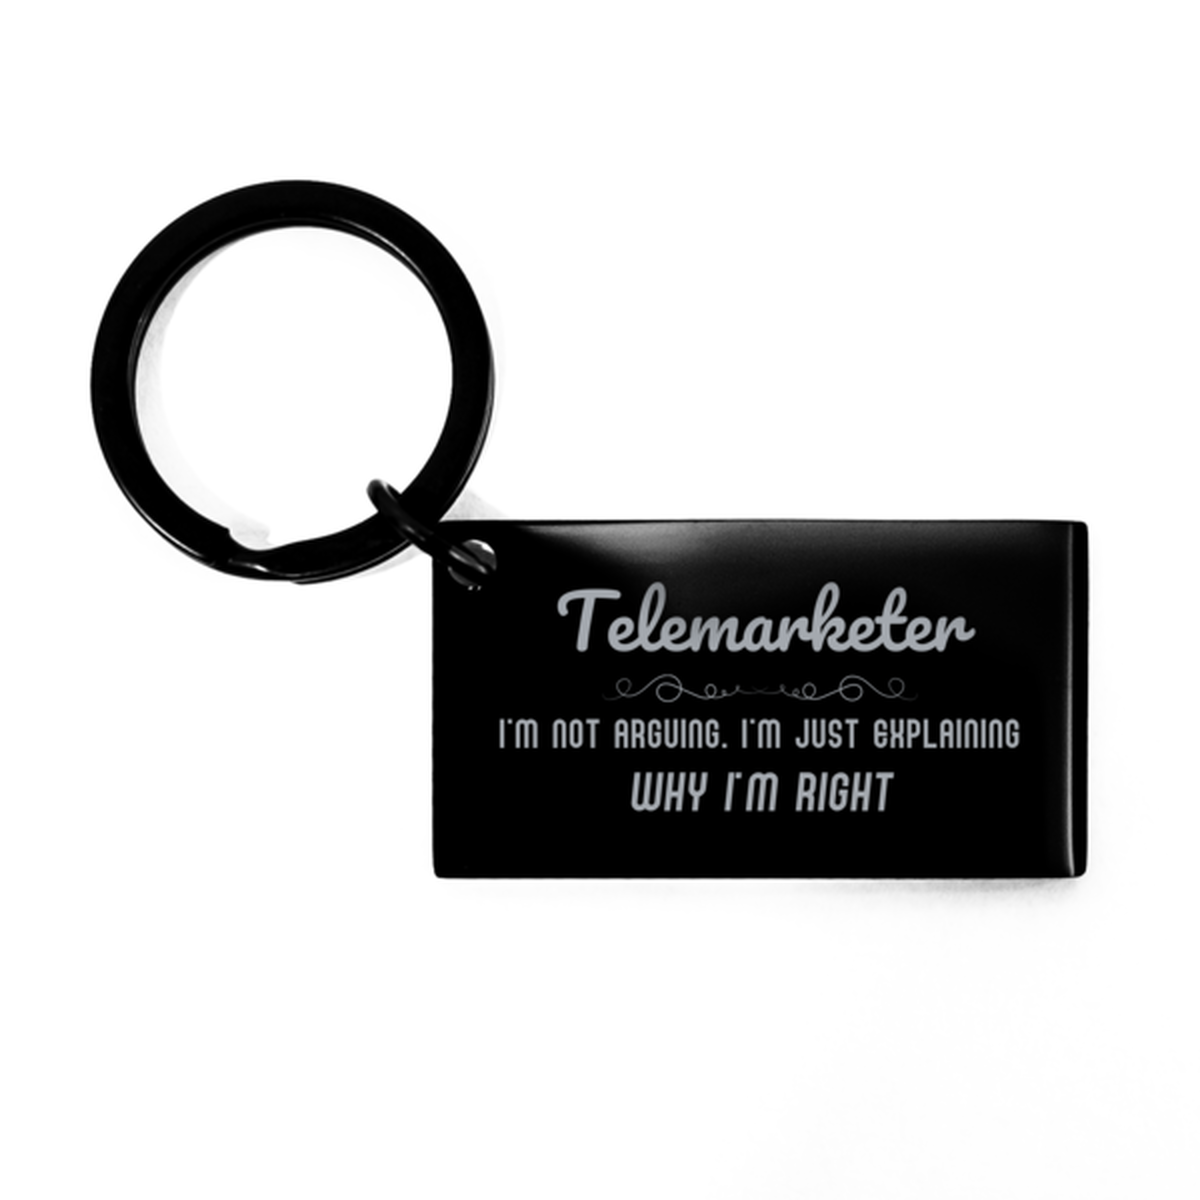 Telemarketer I'm not Arguing. I'm Just Explaining Why I'm RIGHT Keychain, Funny Saying Quote Telemarketer Gifts For Telemarketer Graduation Birthday Christmas Gifts for Men Women Coworker